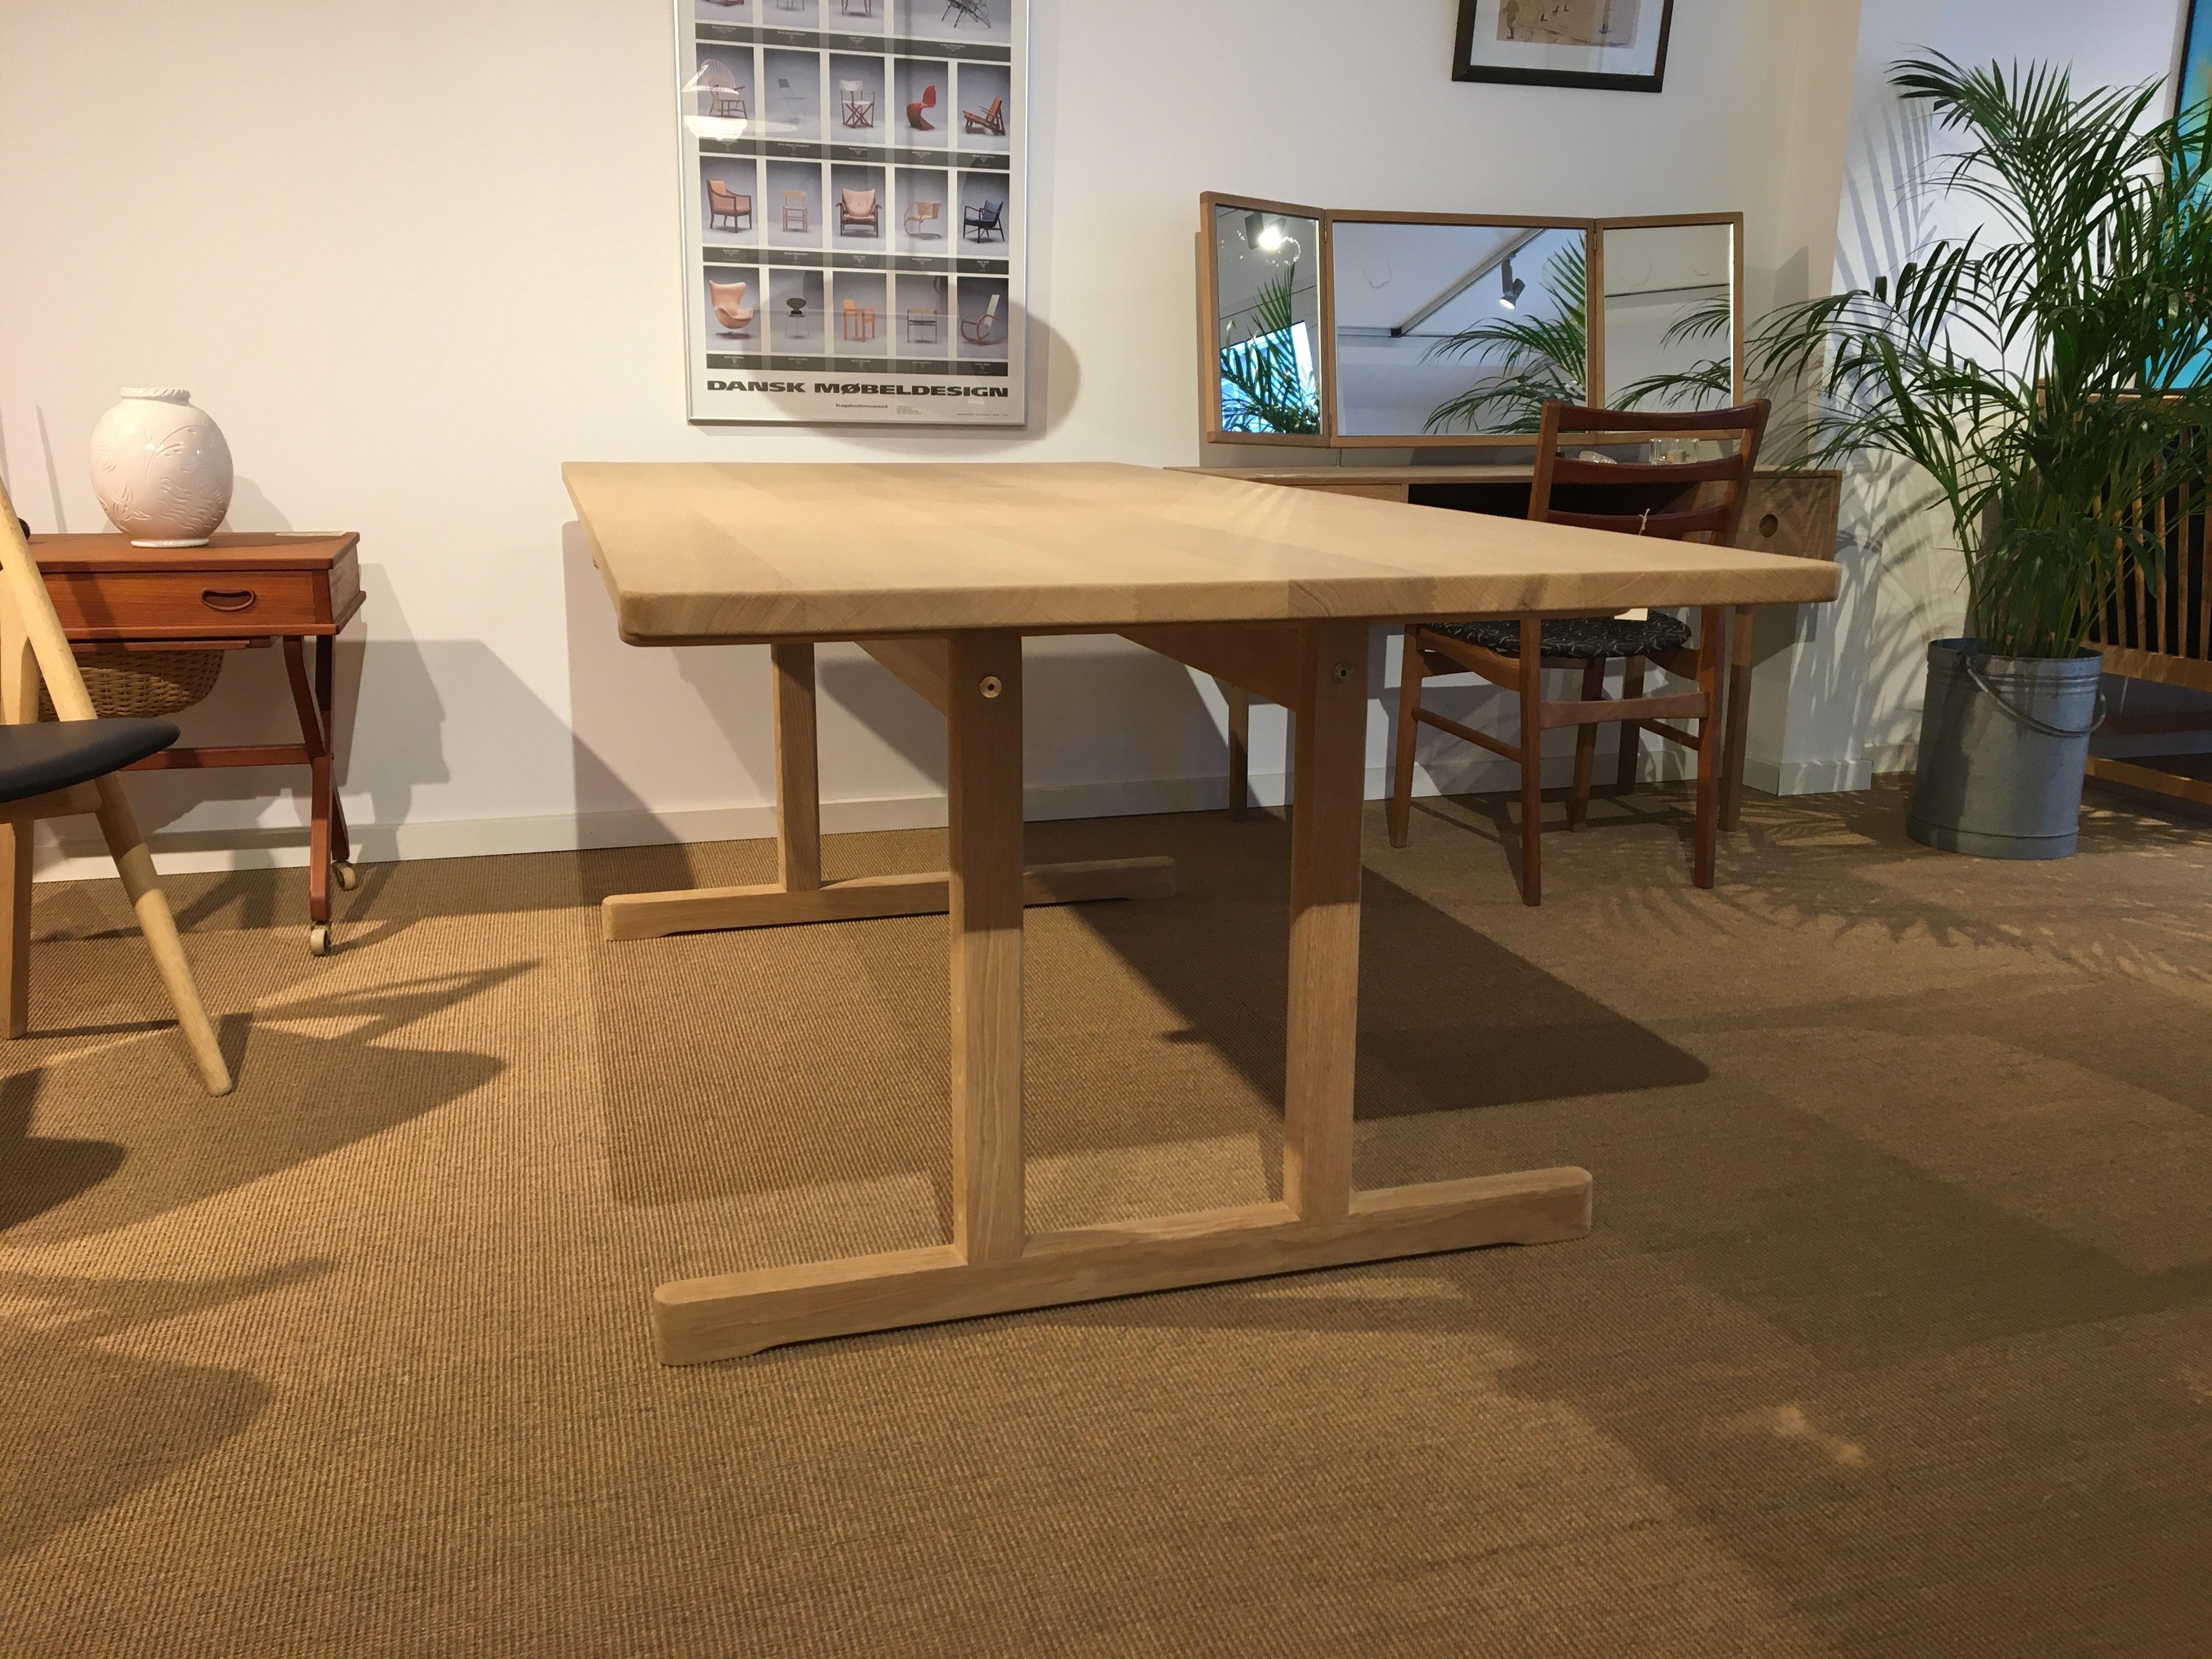 Shaker Table in Solid Oak Model 6286, Designet by Borge Mogensen In Excellent Condition For Sale In Odense, Denmark